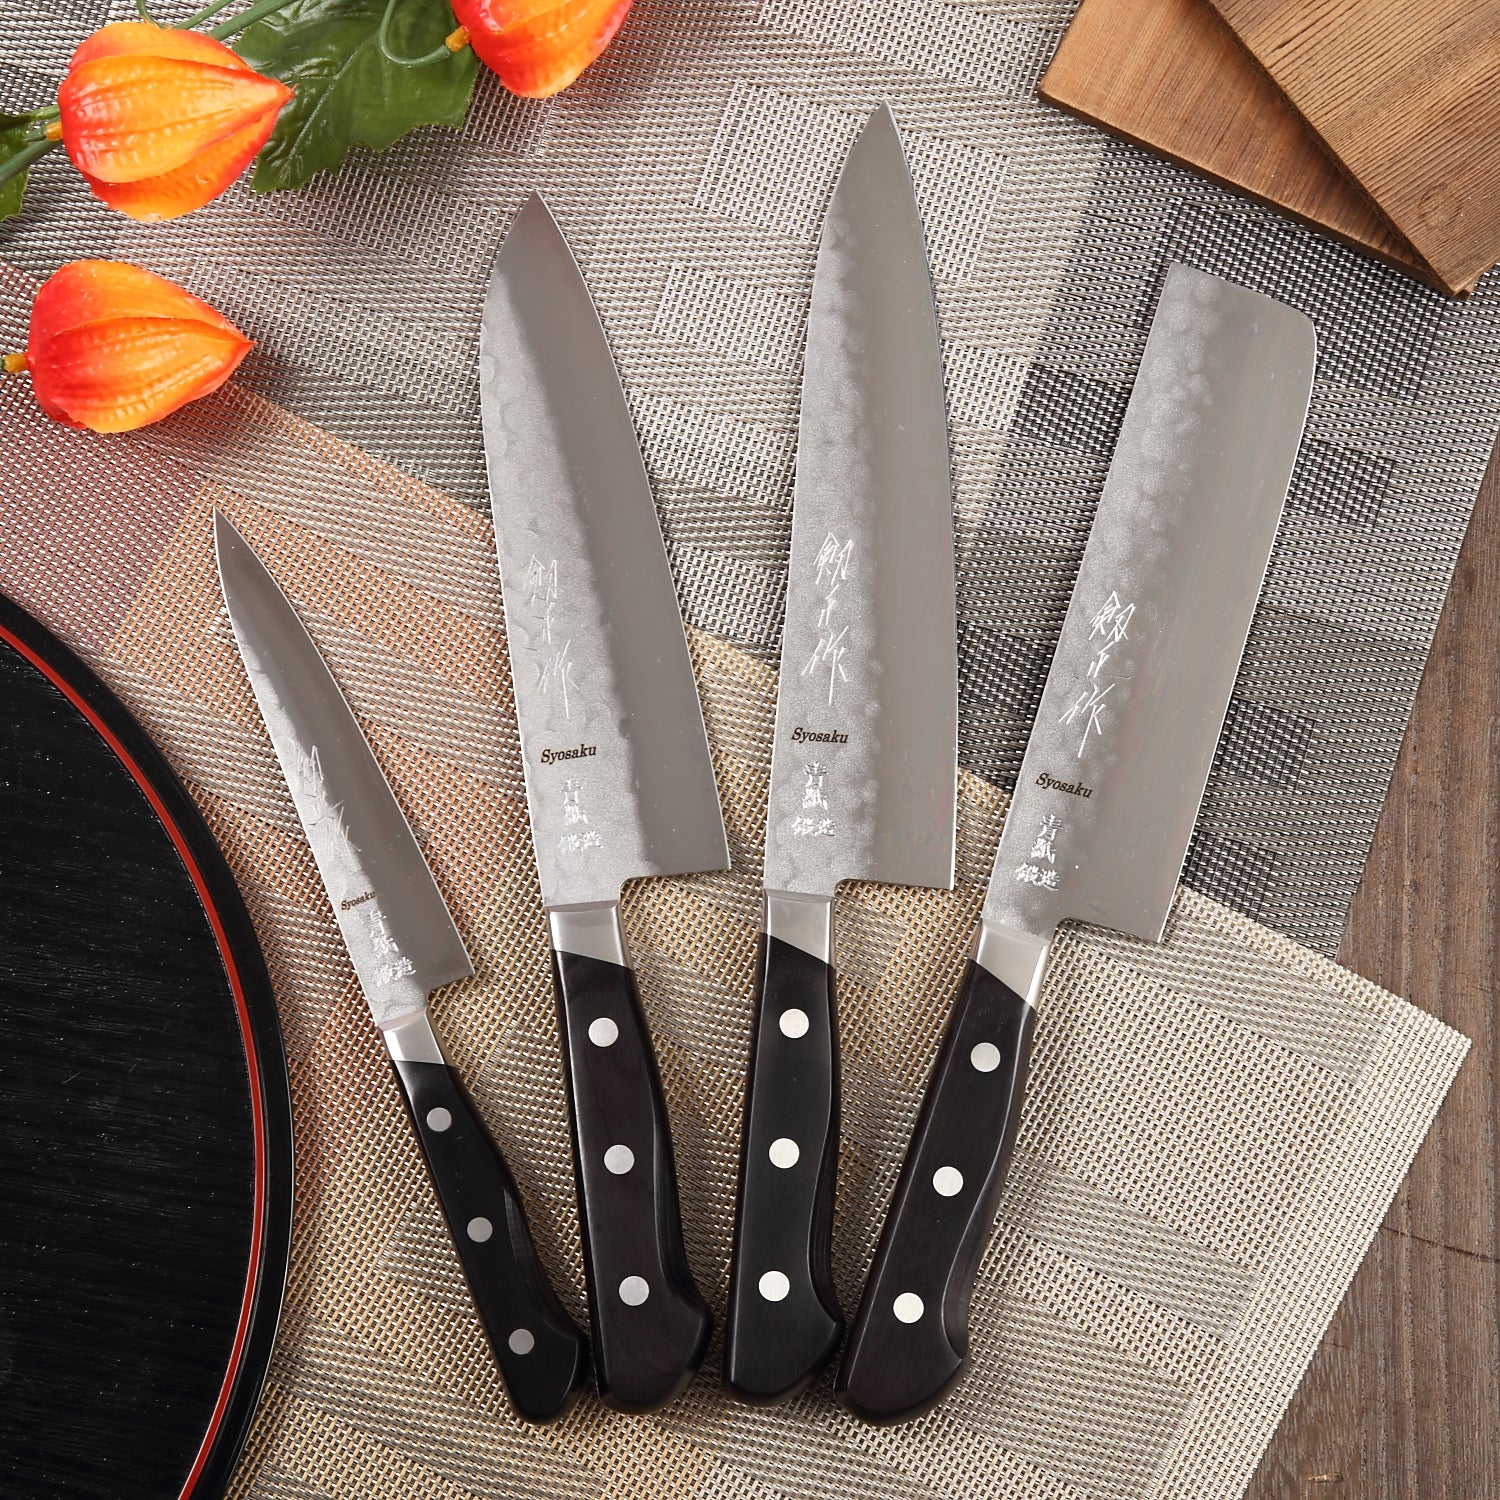 The 7 Best Japanese Knives